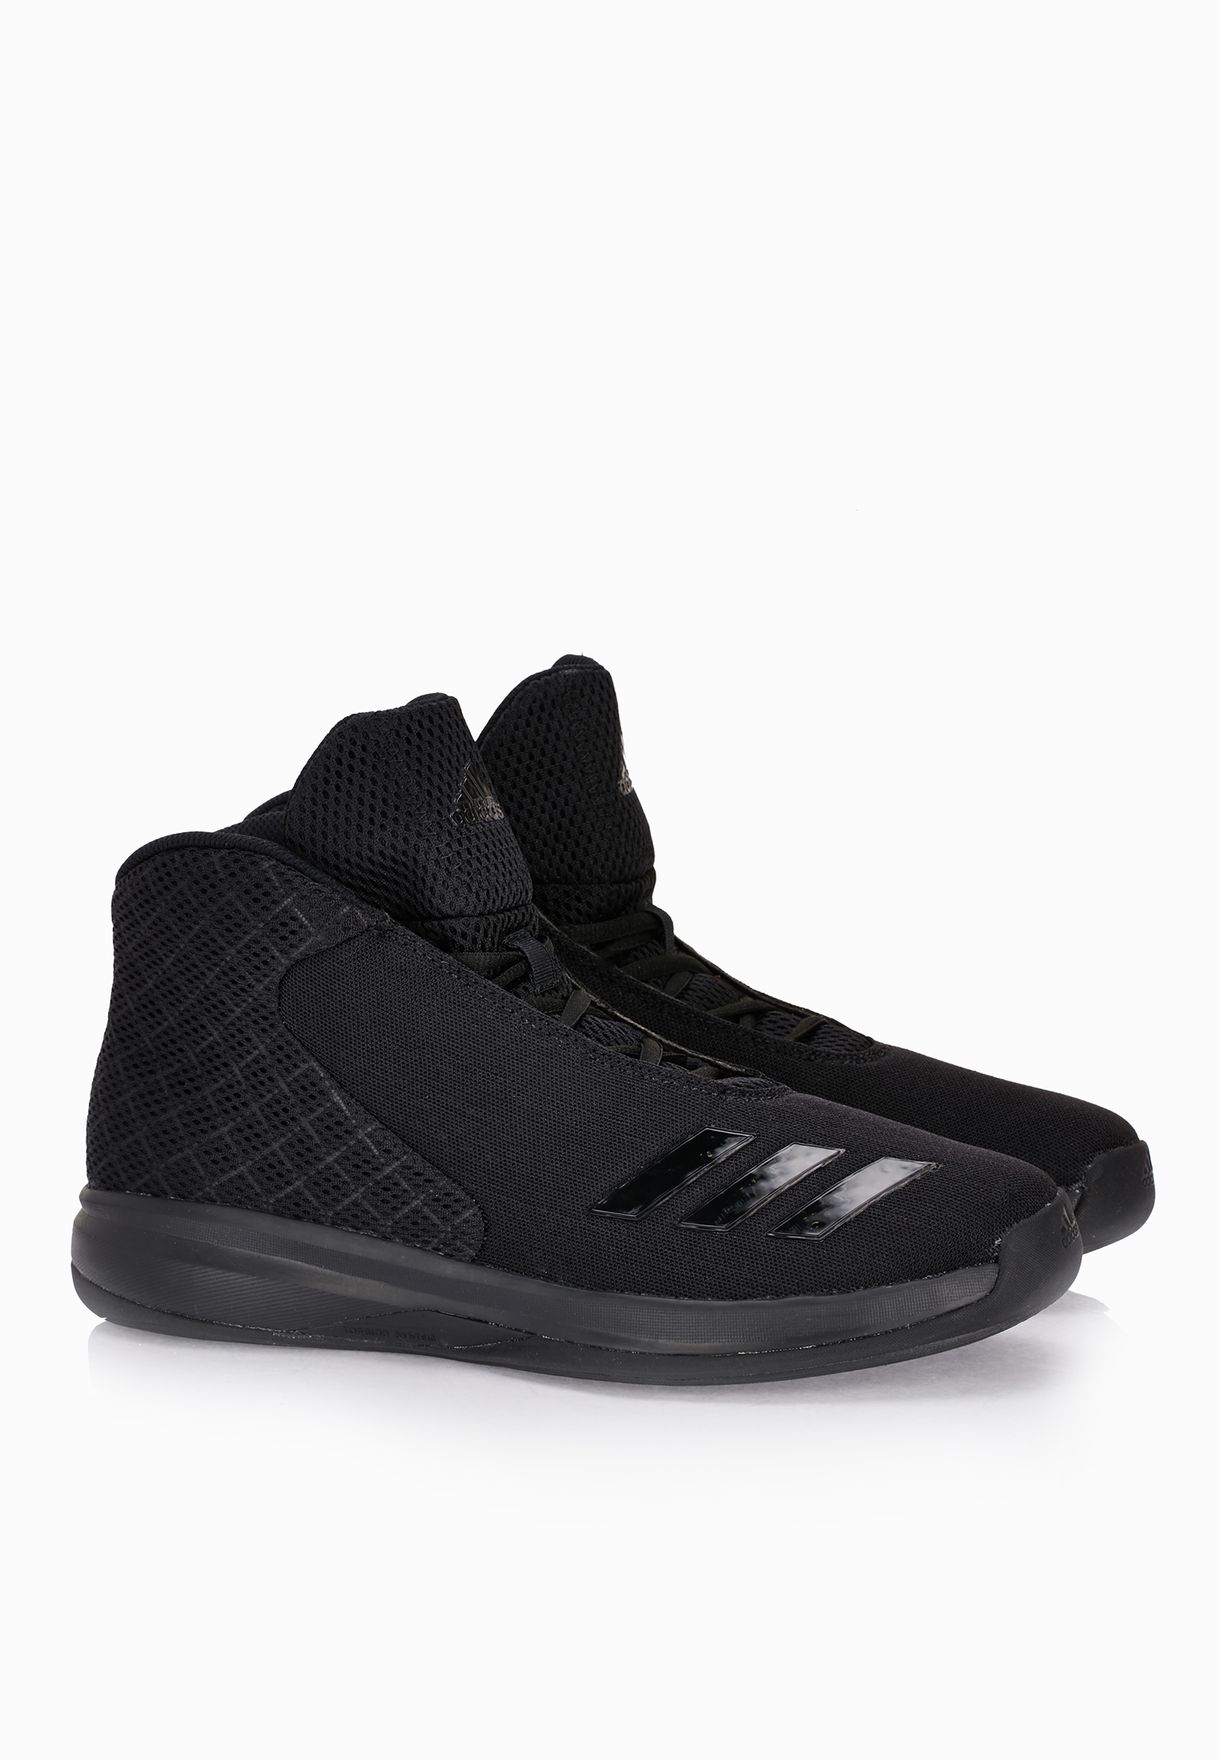 Buy adidas black Court Fury 2016 for 